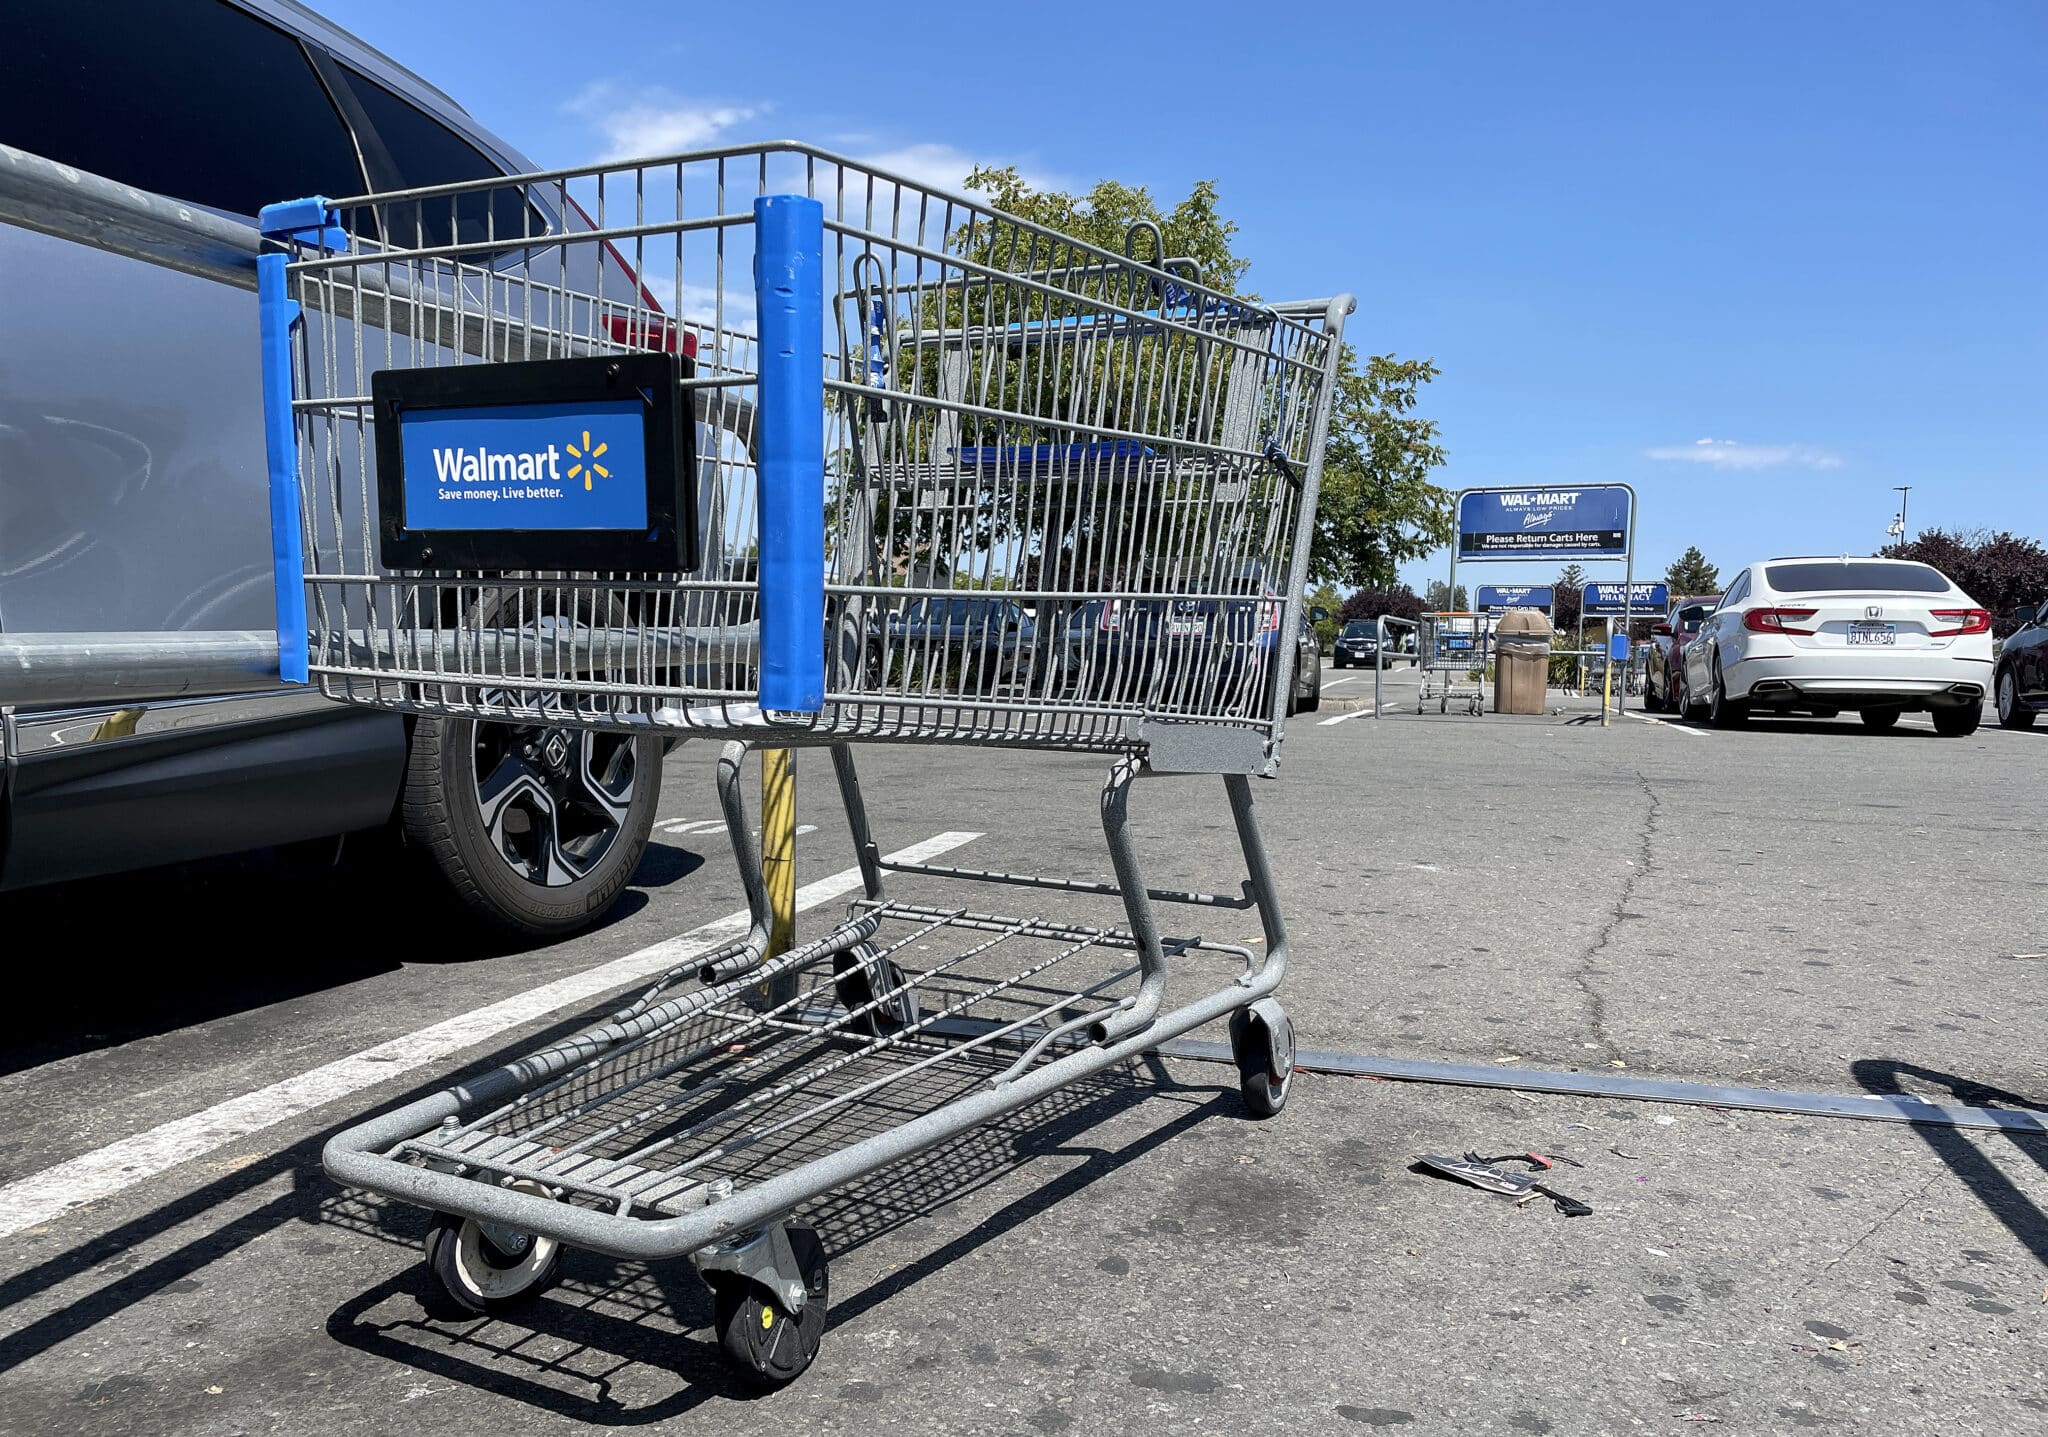 Shopping carts sit in the parking lot of a Walmart store